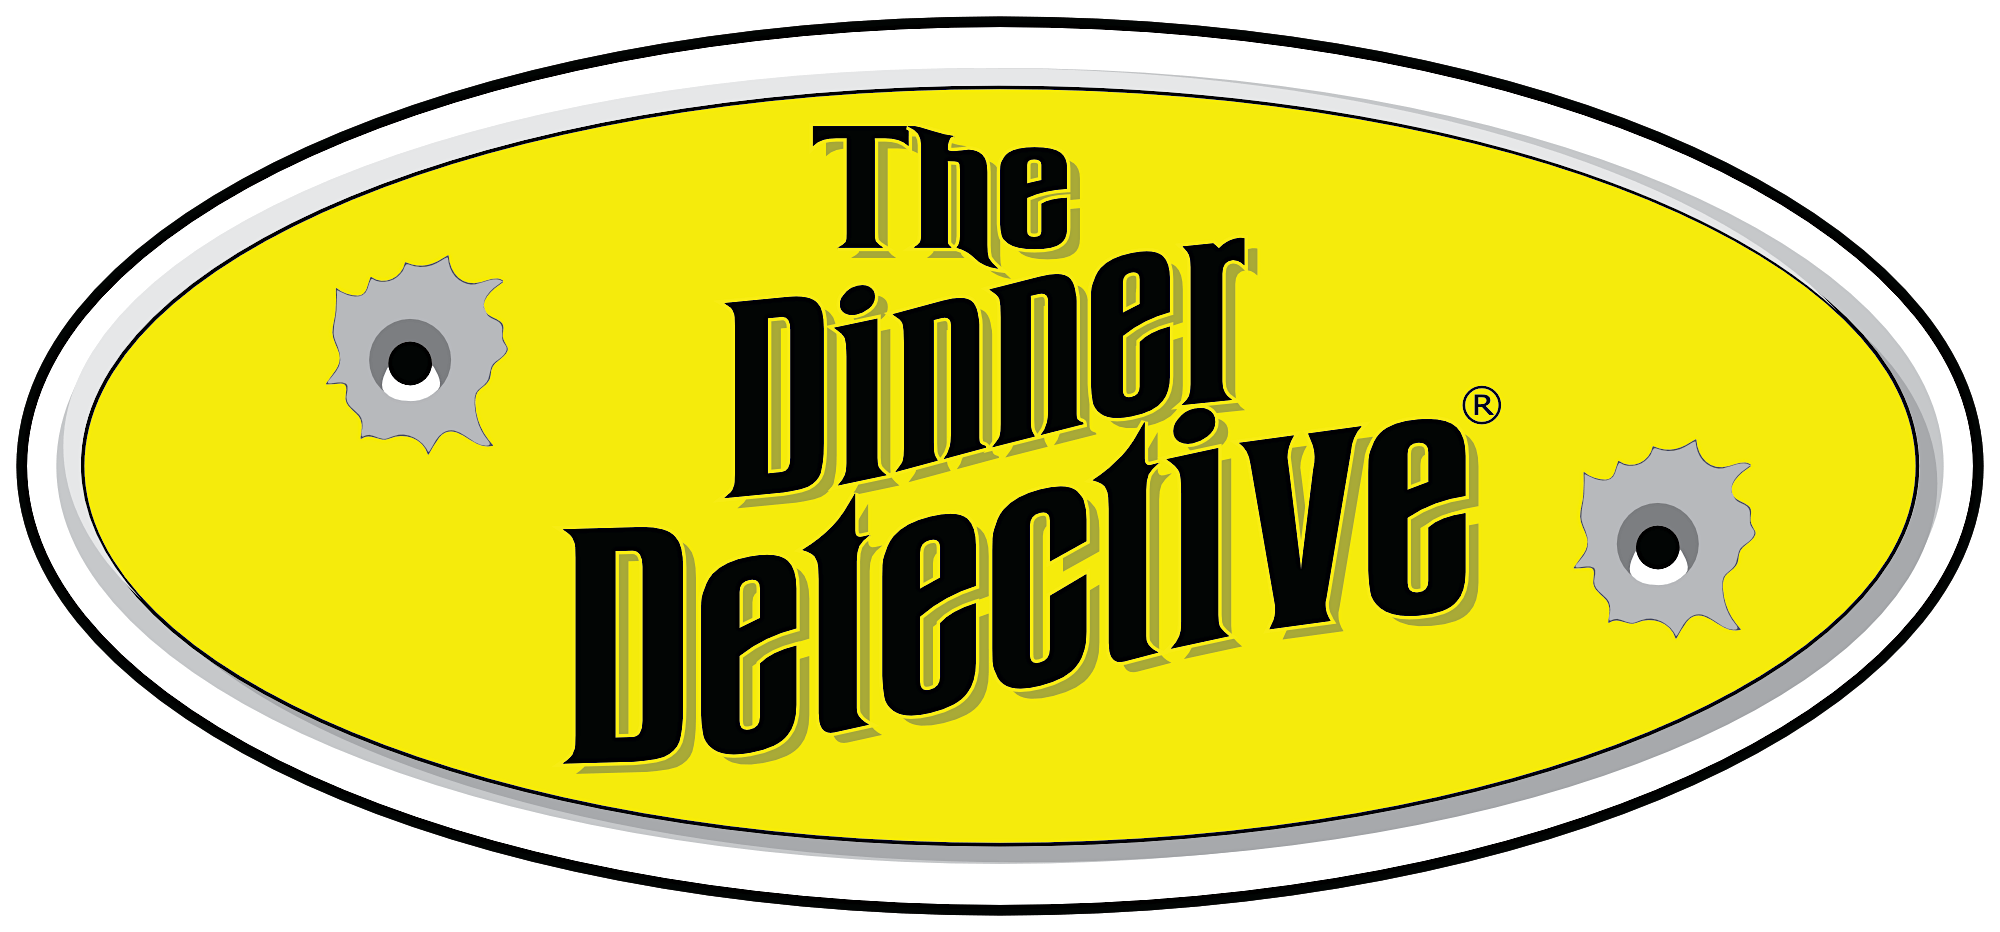 The Dinner Detective Interactive M**der Mystery Show